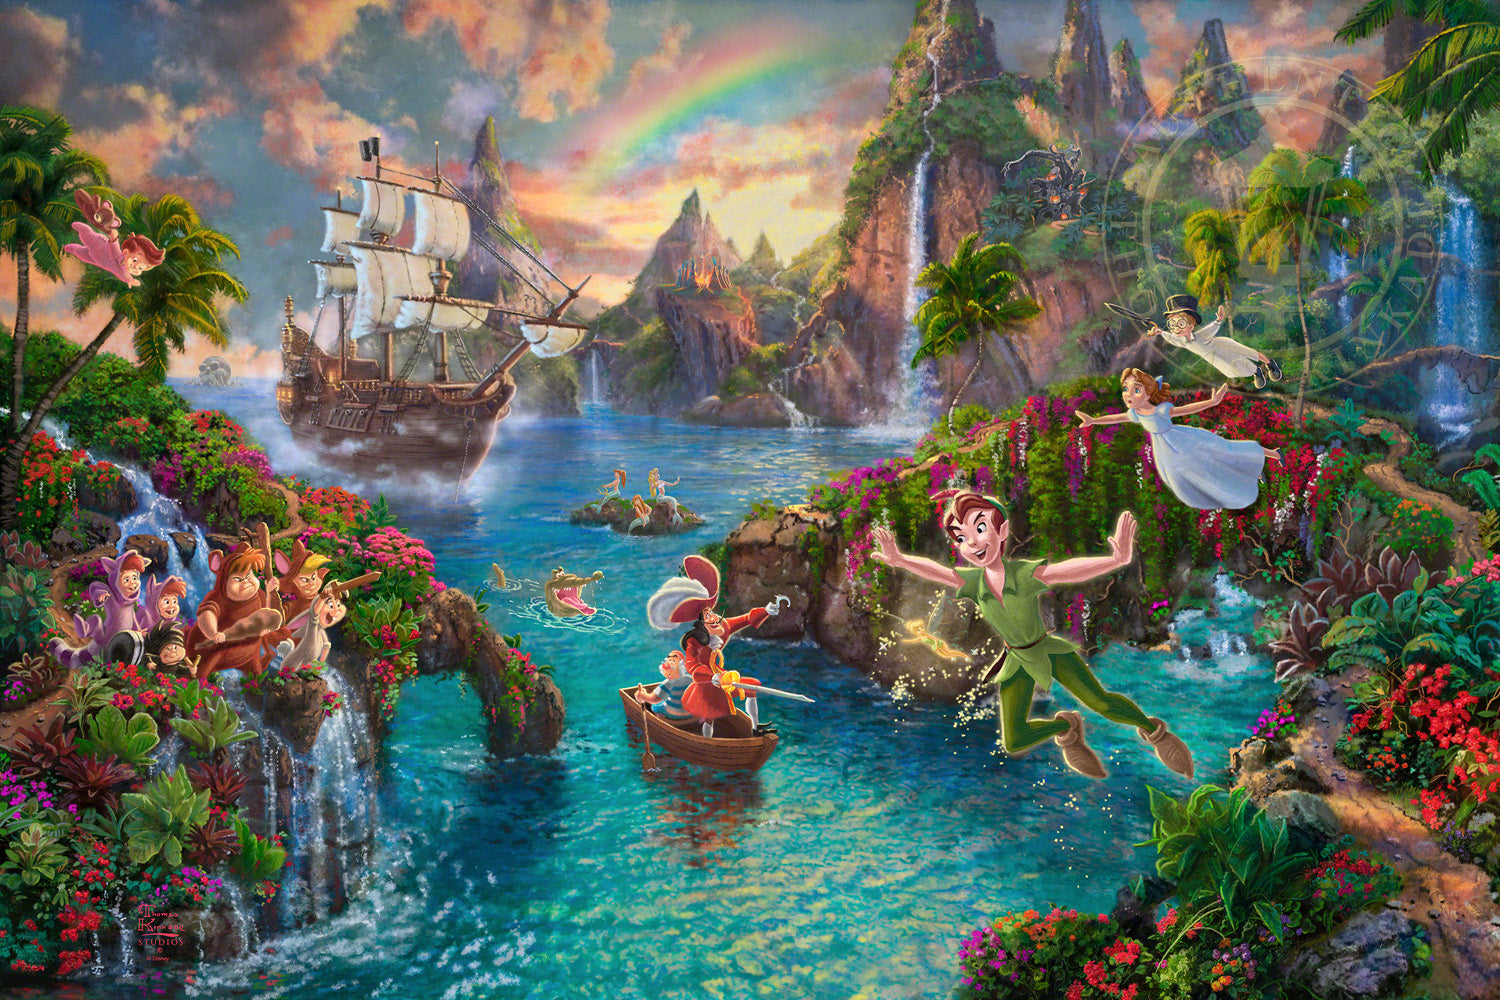 Thomas Kinkade Studios "Disney Peter Pan's Neverland" Limited and Open Canvas Giclee